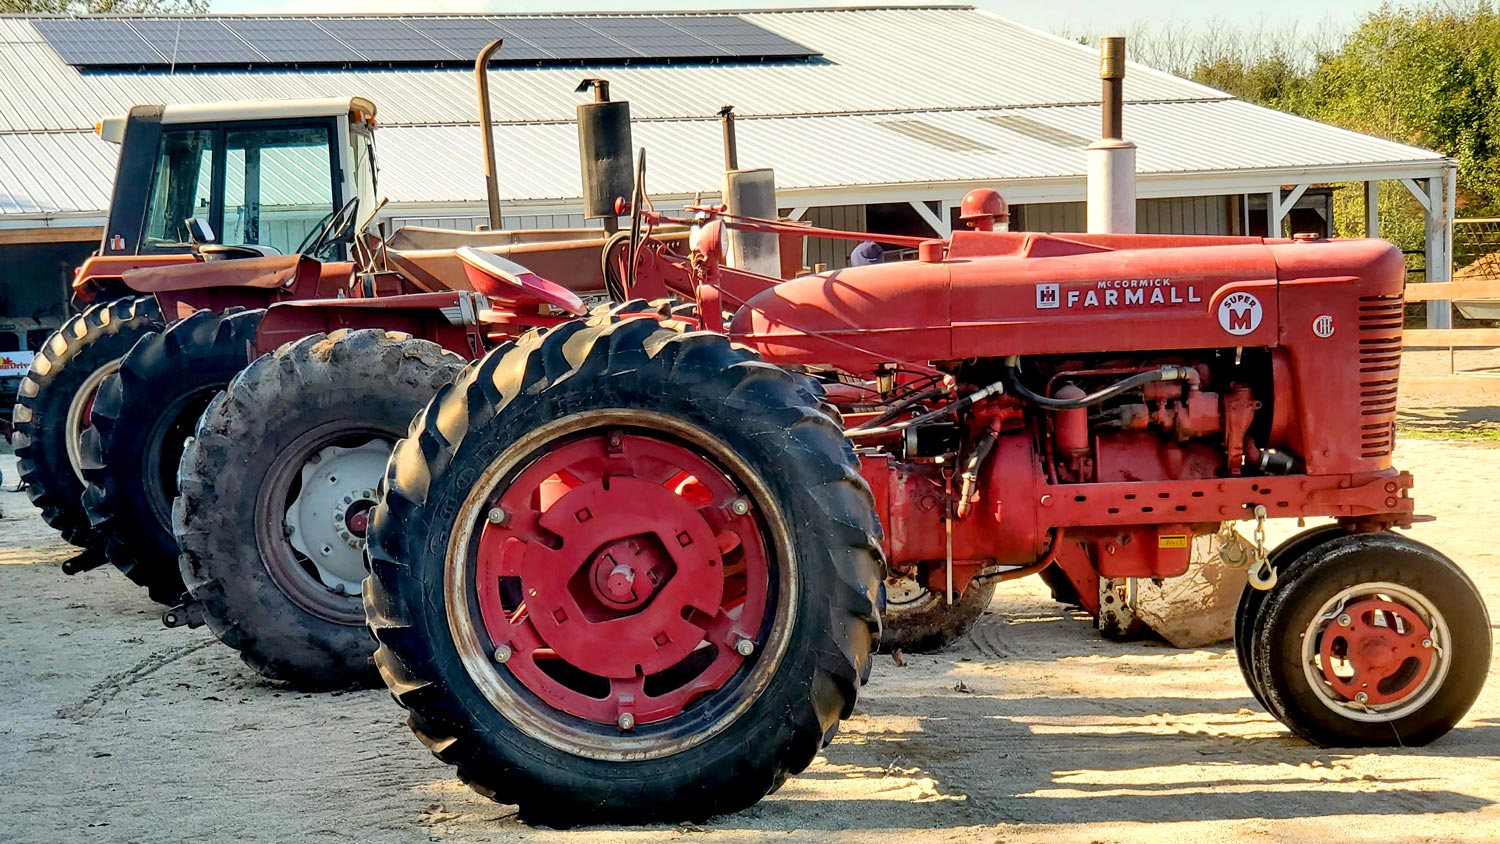 Antique Farmall Super M tractor on display at 5 Lazy K Ranch.